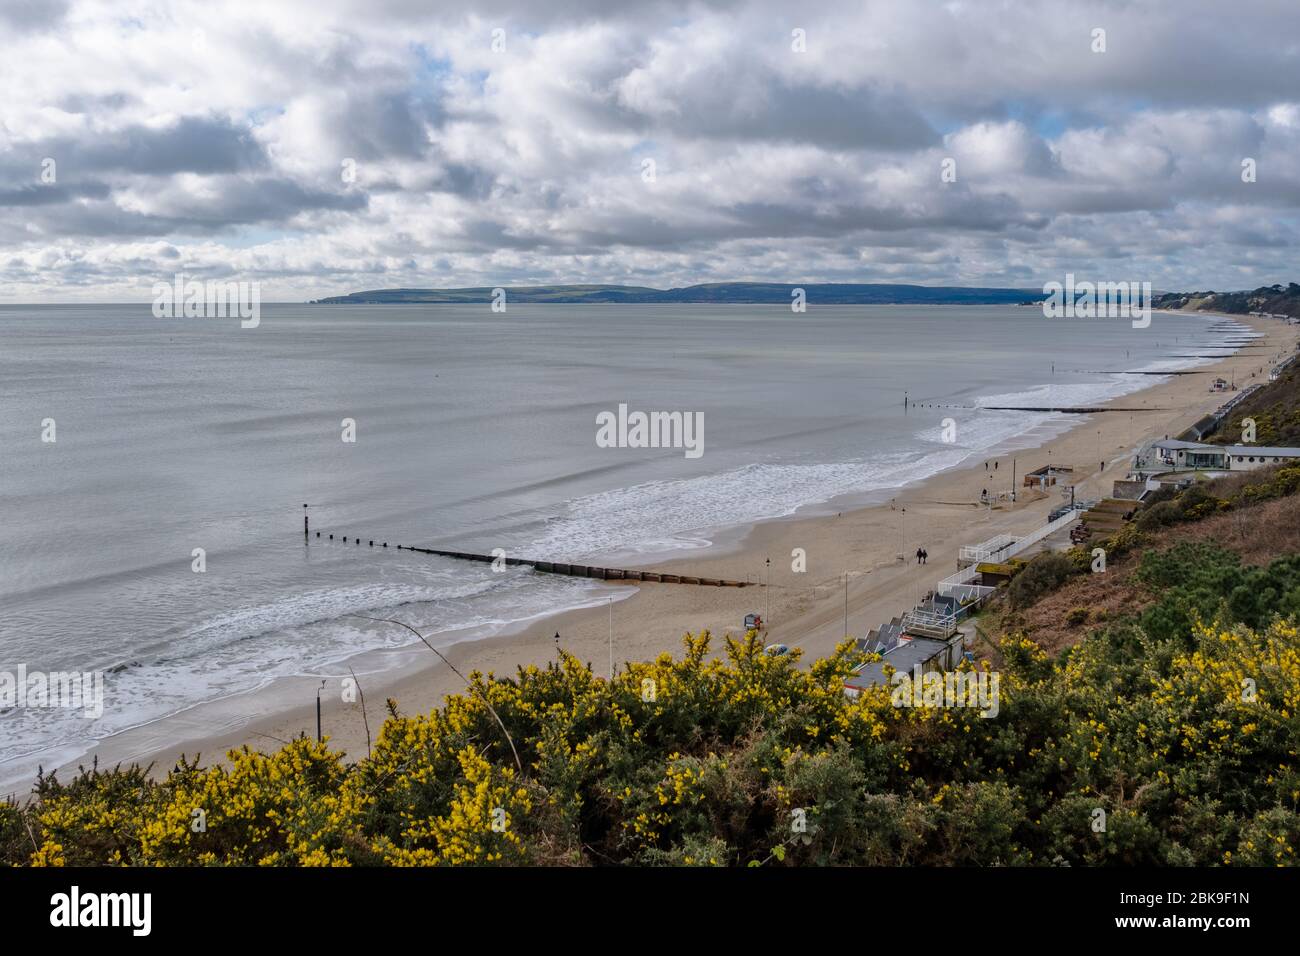 View from the Clifftop at Durley Chine. Stock Photo